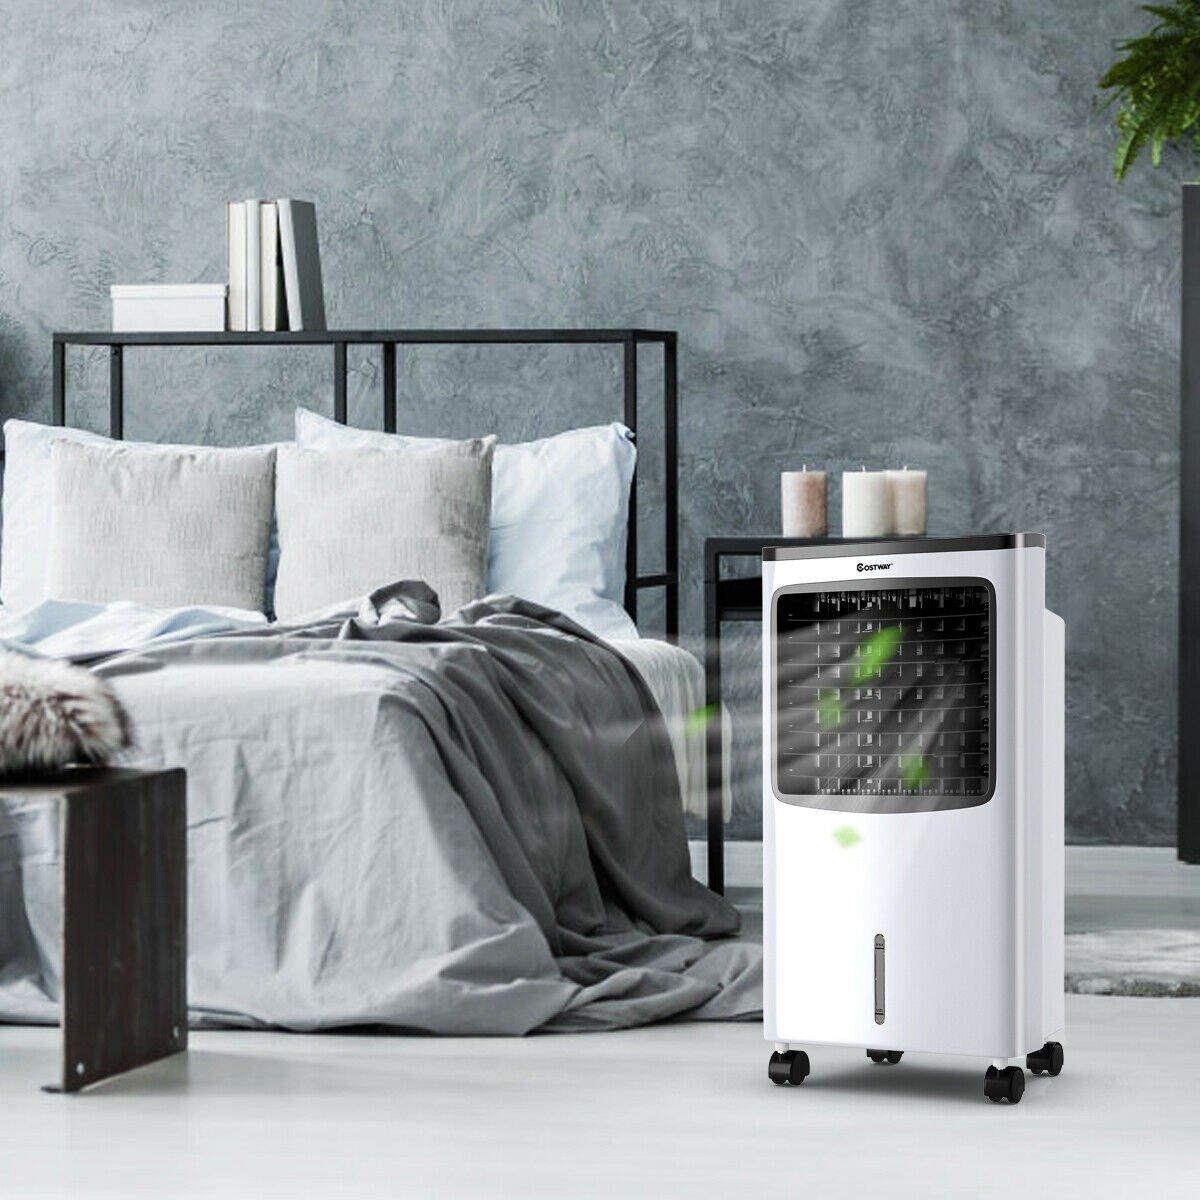 Portable Air Conditioner Stand Up Room Cooler Indoor AC Unit \u2013 Ease2day